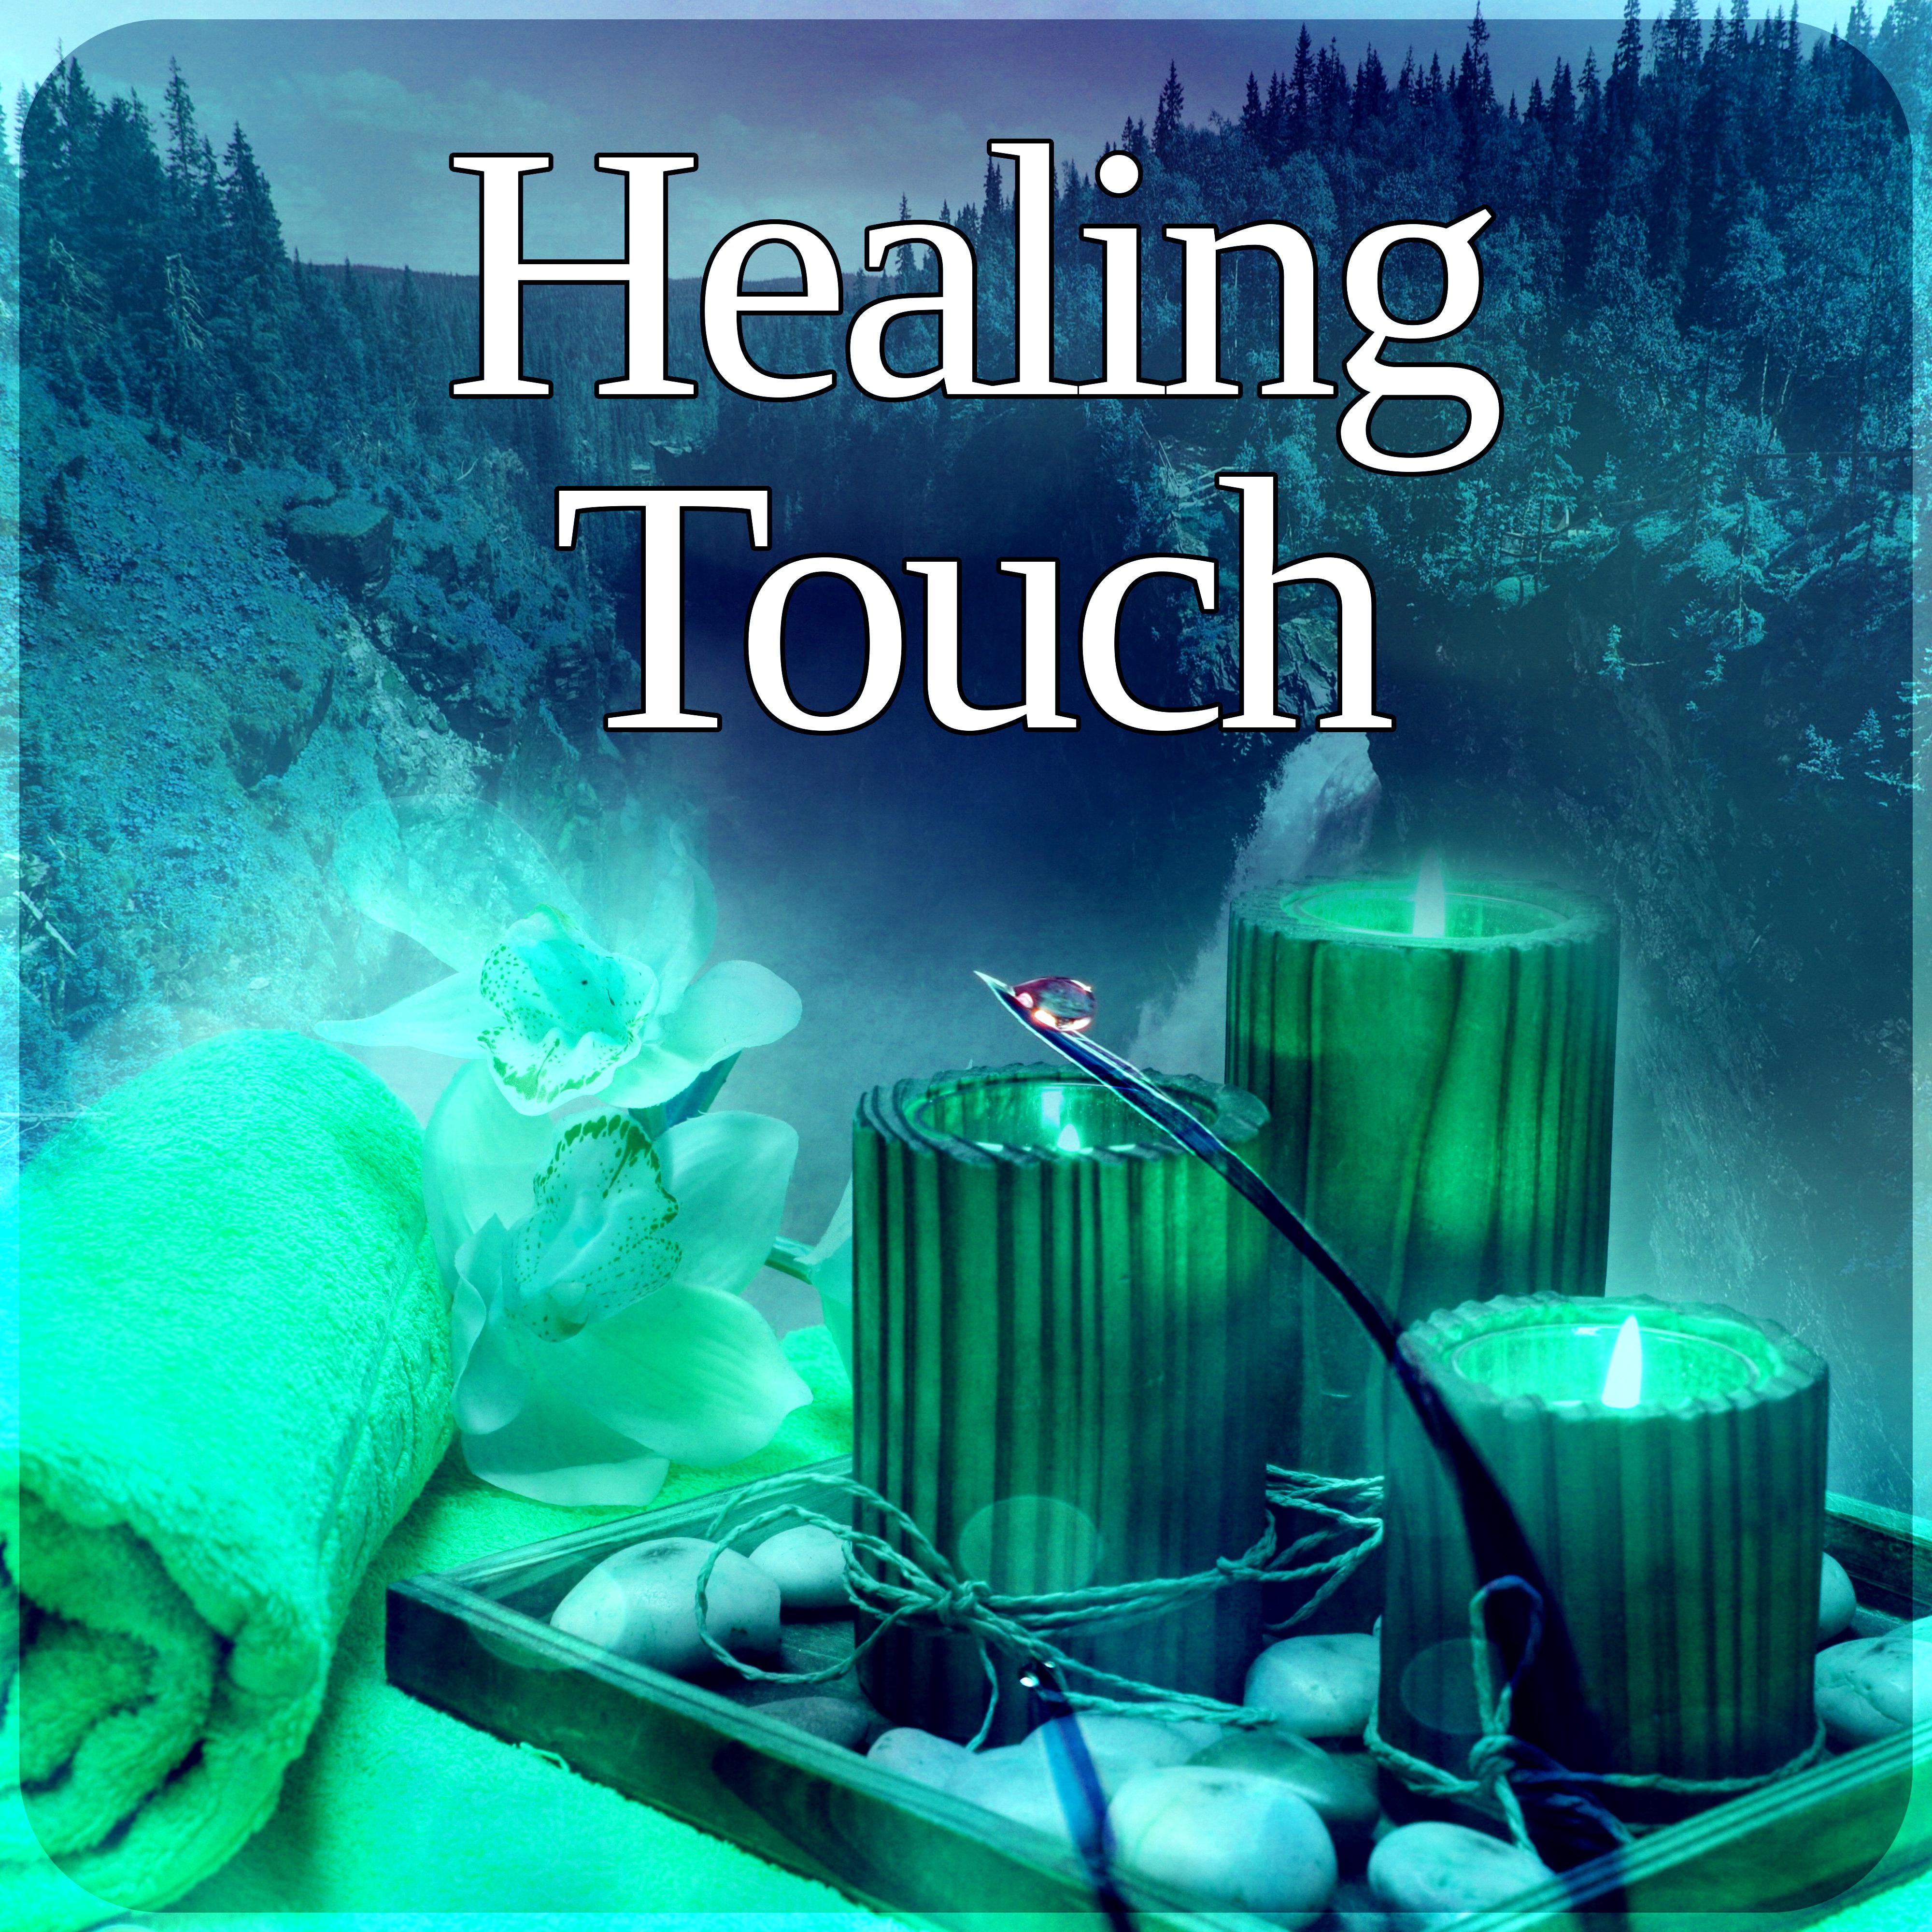 Healing Touch - Inner Peace, Calm Music for Relaxation, Sounds of Nature, Reiki Healing, Deep Sounds for Meditation, Therapeutic Touch, Background Music